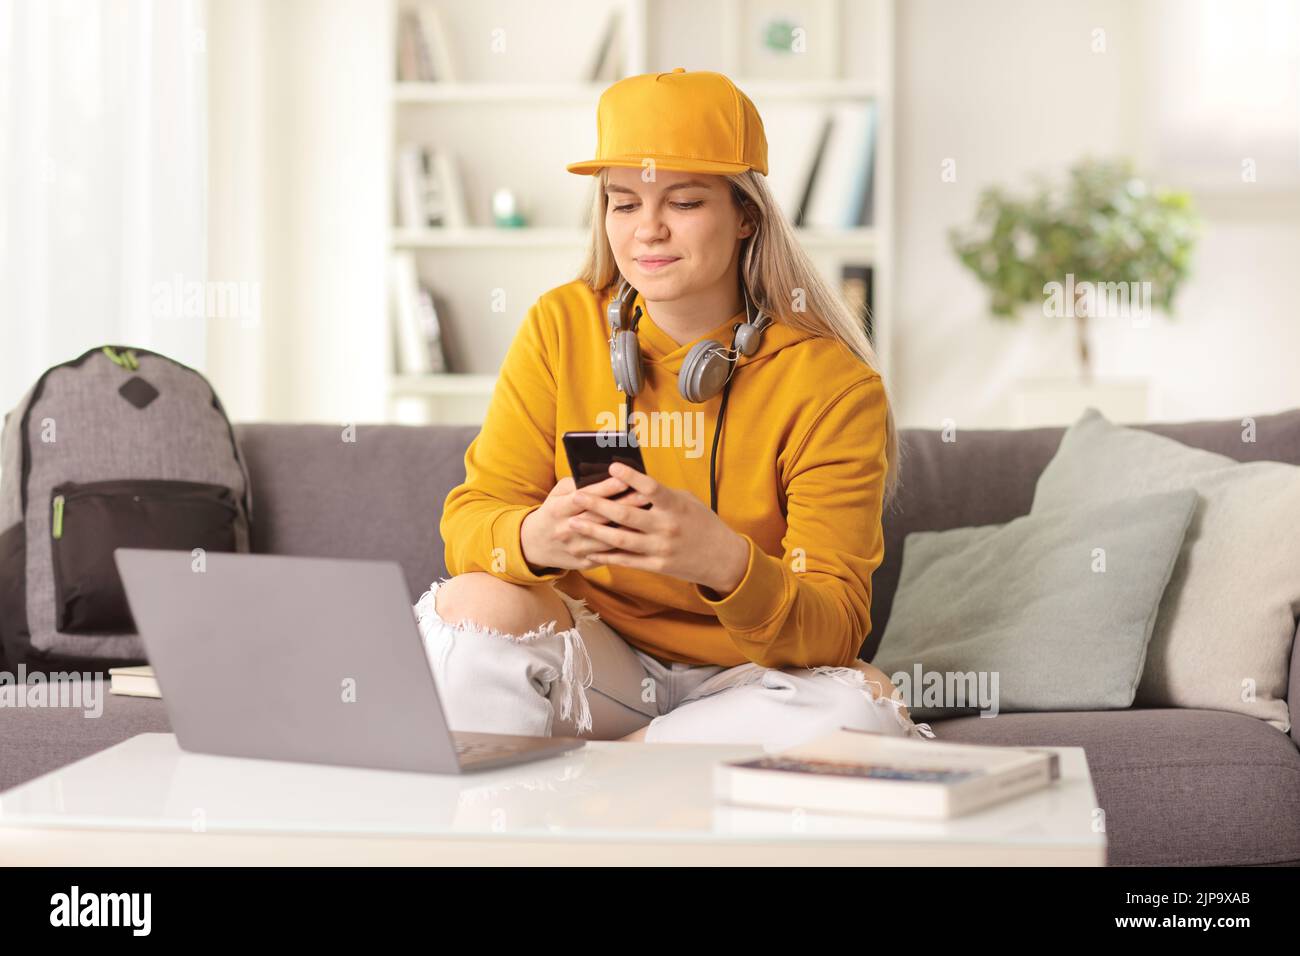 Young female sitting in front of a laptop computer at home and using a smartphone Stock Photo